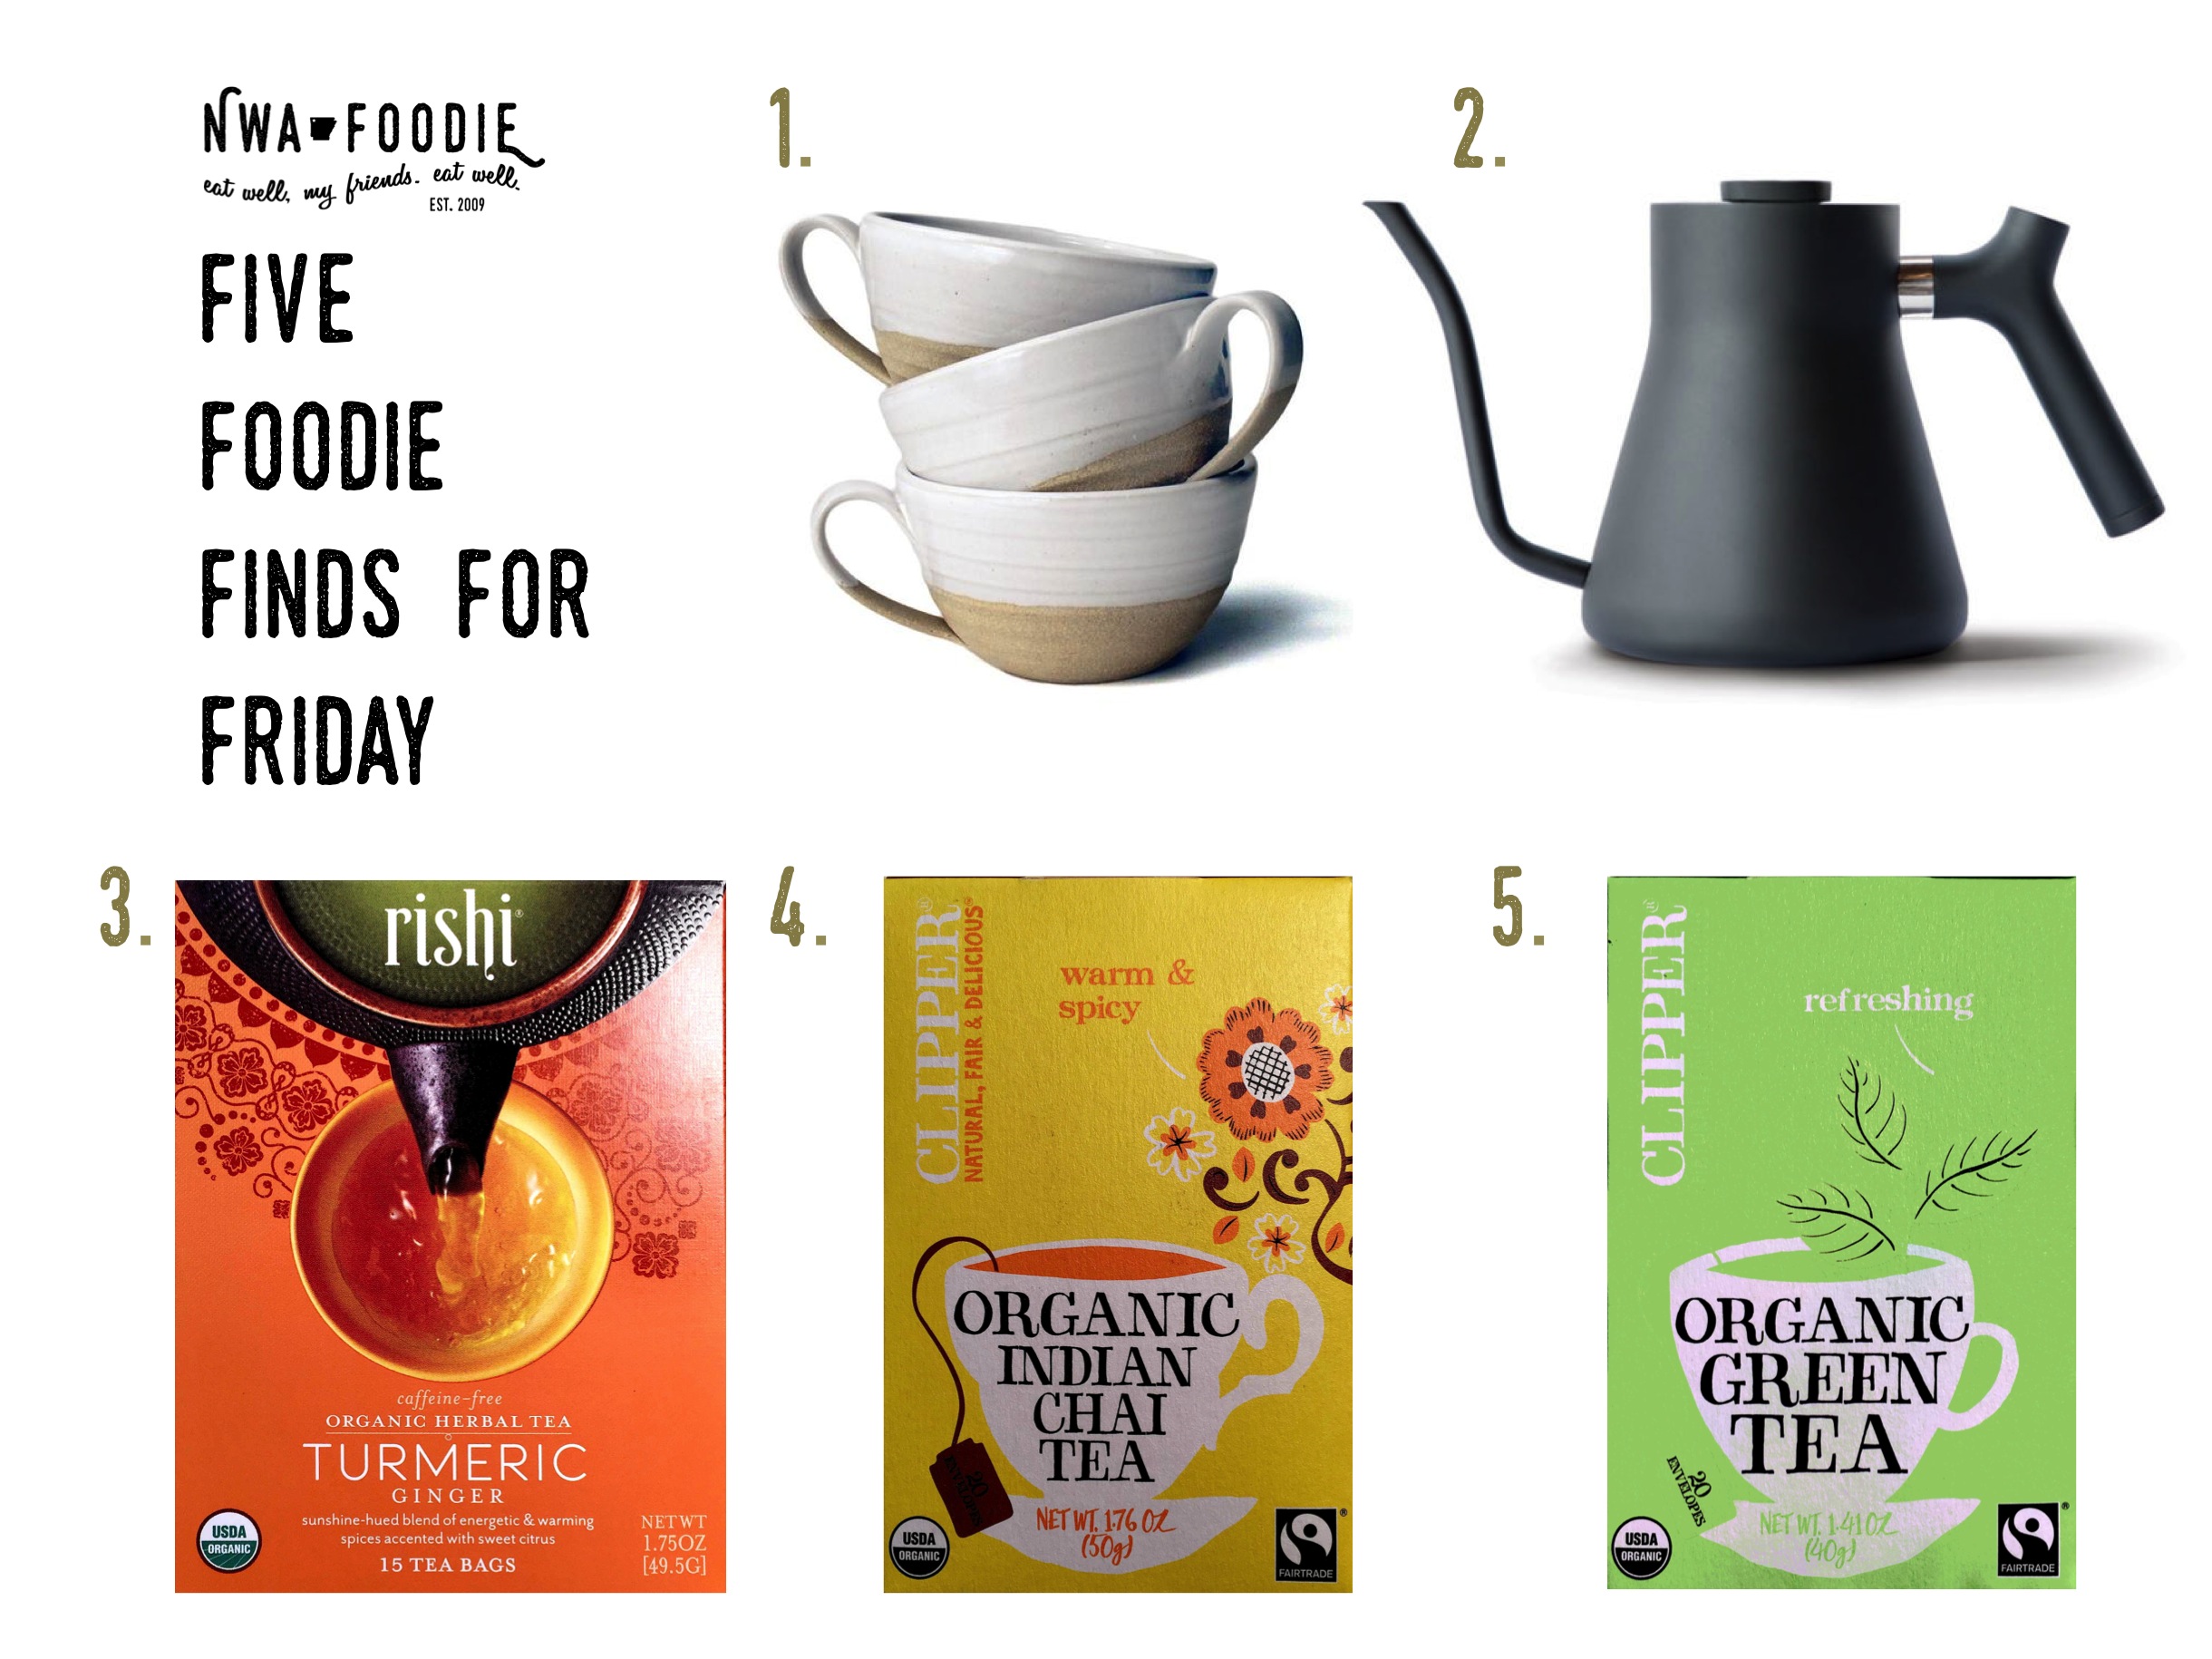 Five Foodie Finds For Friday, Rishi Tea, Clipper Tea (c)nwafoodie